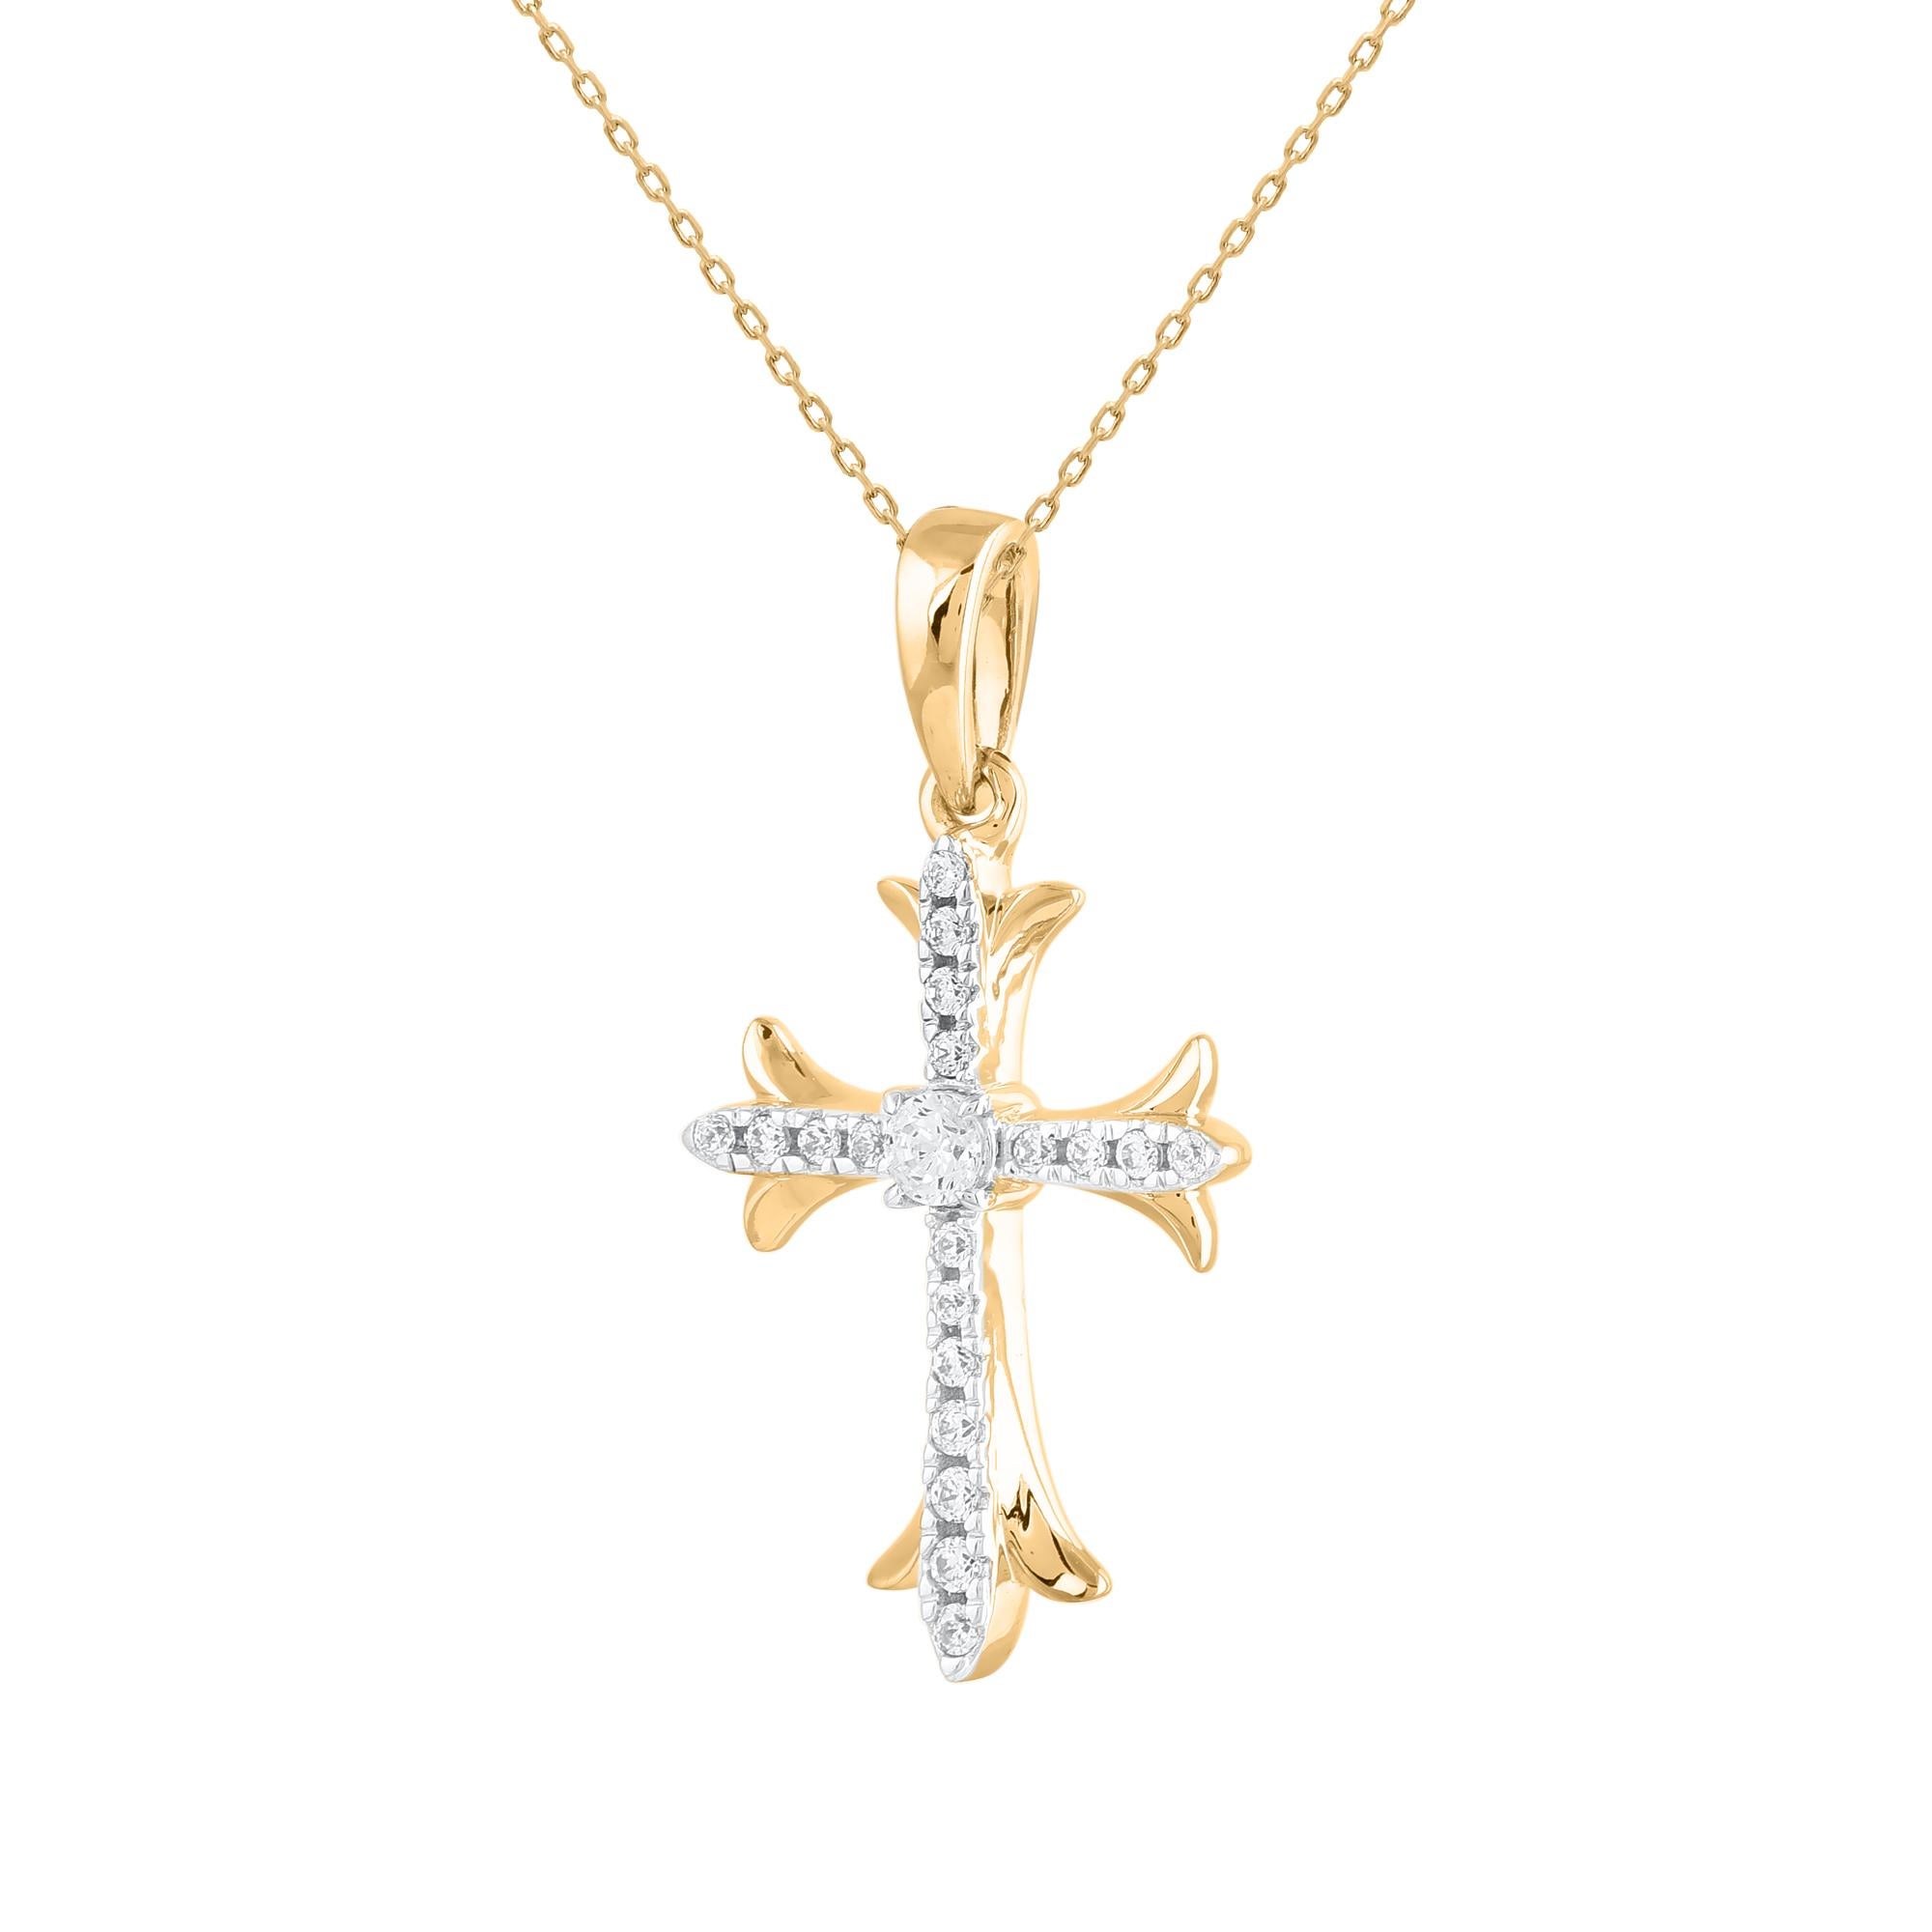 The traditional cross pendant has been given an update with the emphasis on style. Beautifully crafted by our inhouse experts in 14 karat two tone gold and embellished with 20 round diamond in prong setting. The total diamond weight is 0.10 carat